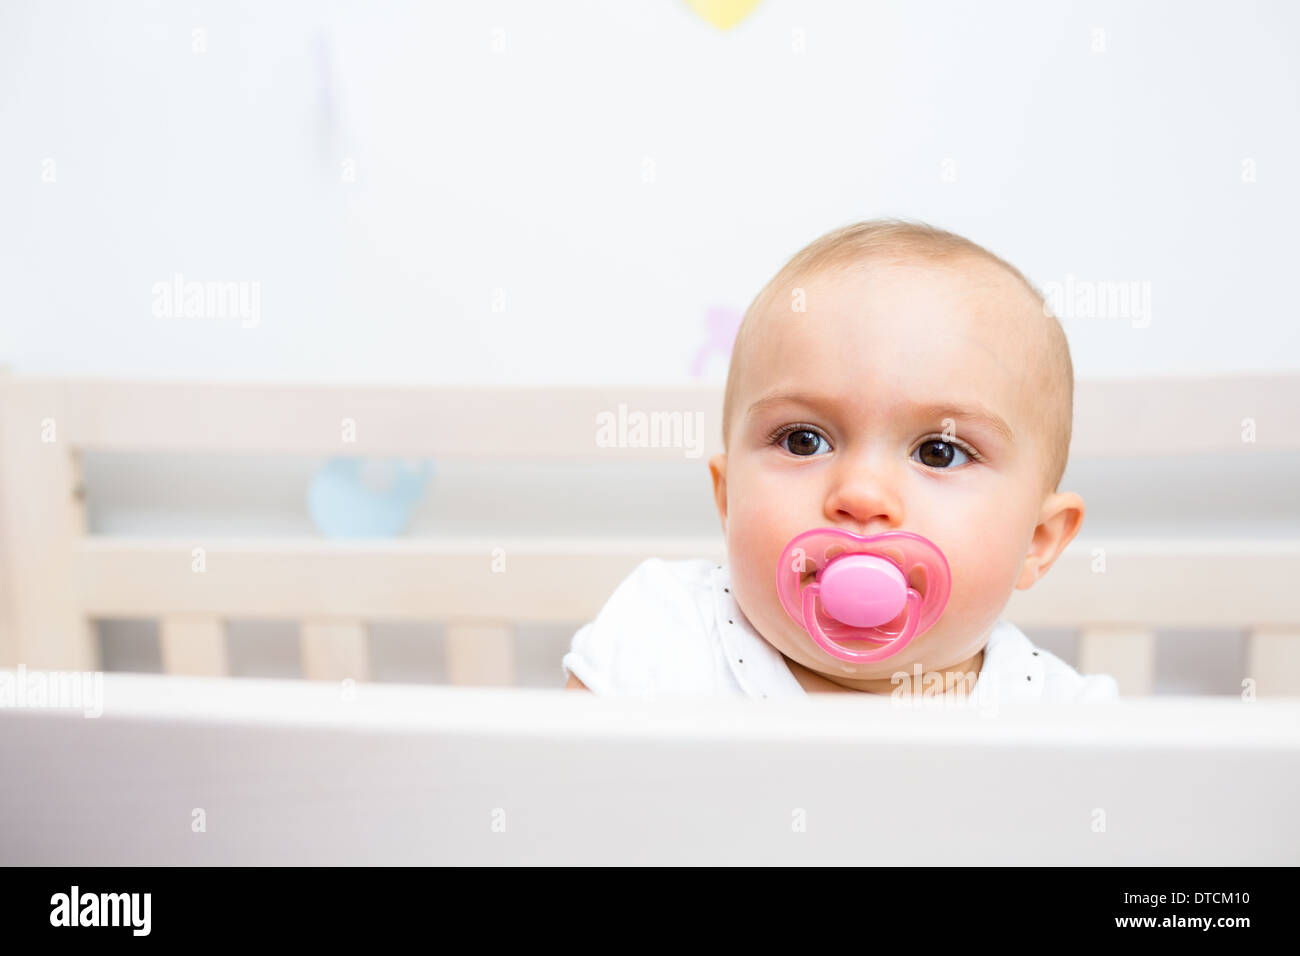 Closeup of a cute baby with pacifier in mouth Stock Photo